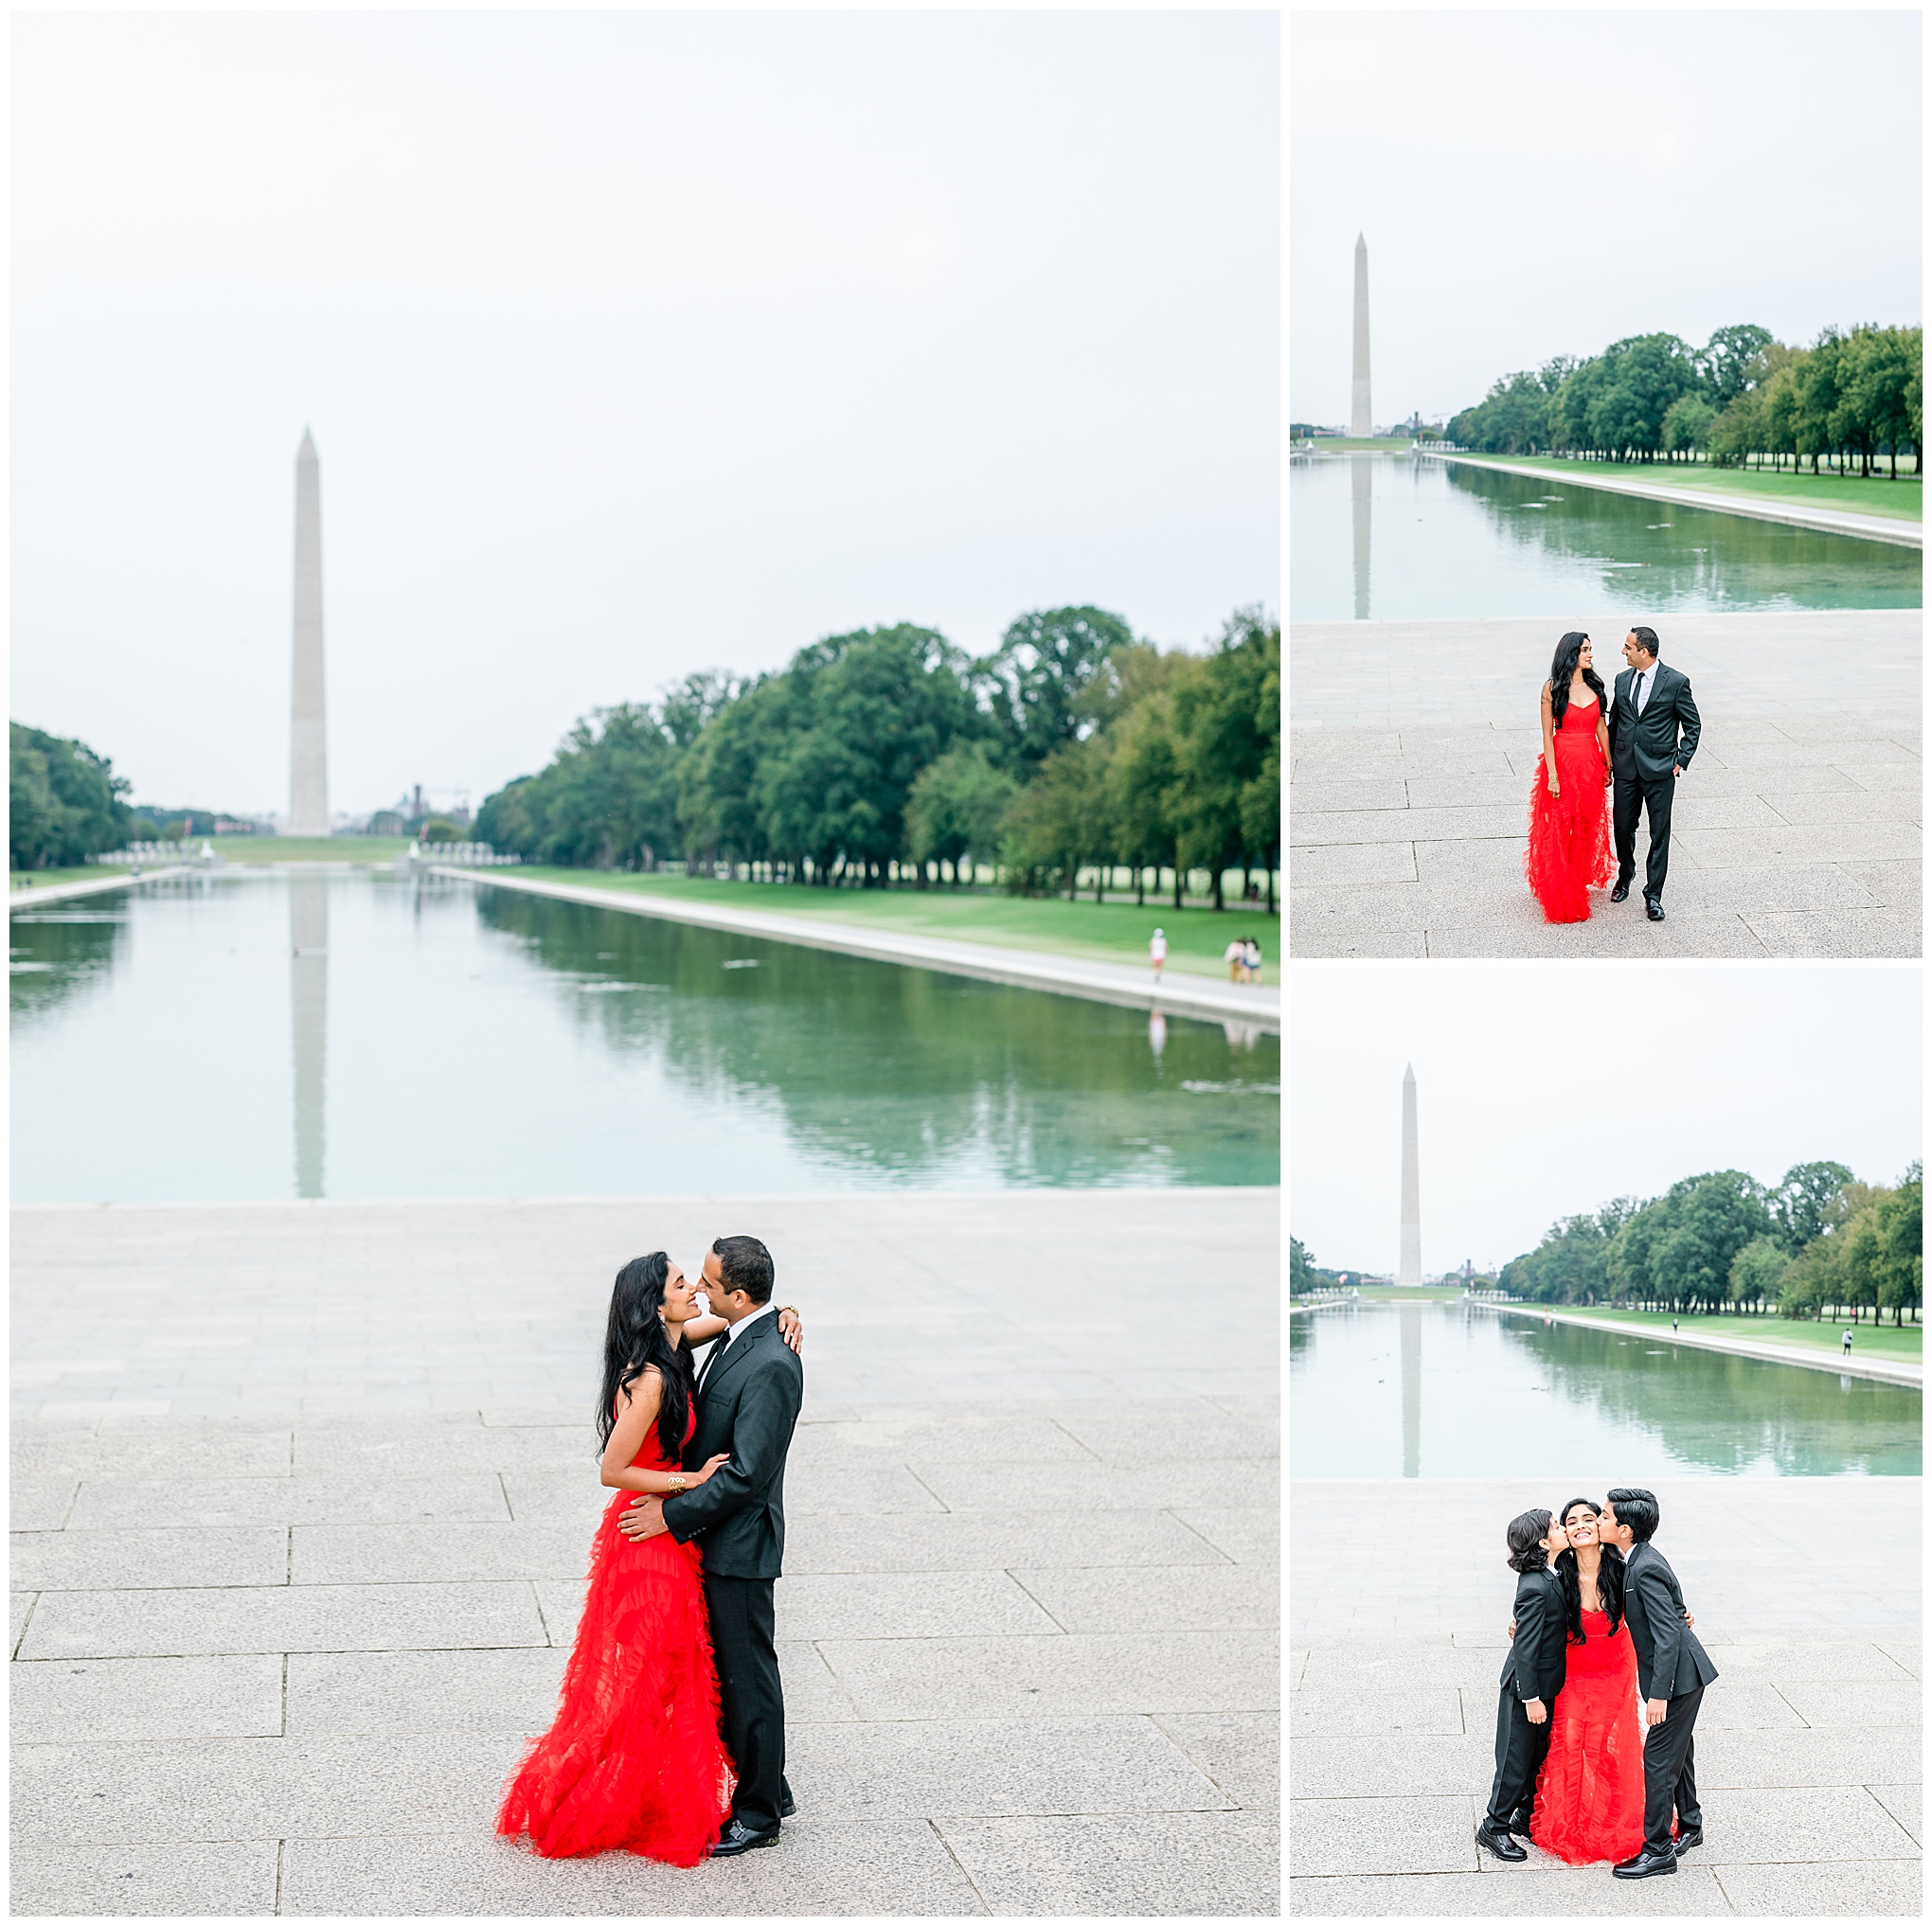 formal Lincoln Memorial family photos, formal family portraits, Lincoln Memorial portraits, Washington DC family photos, National Mall portraits, Rachel E.H. Photography, formal family photos, DC photographer, red gown, romantic portraits, mother and sons